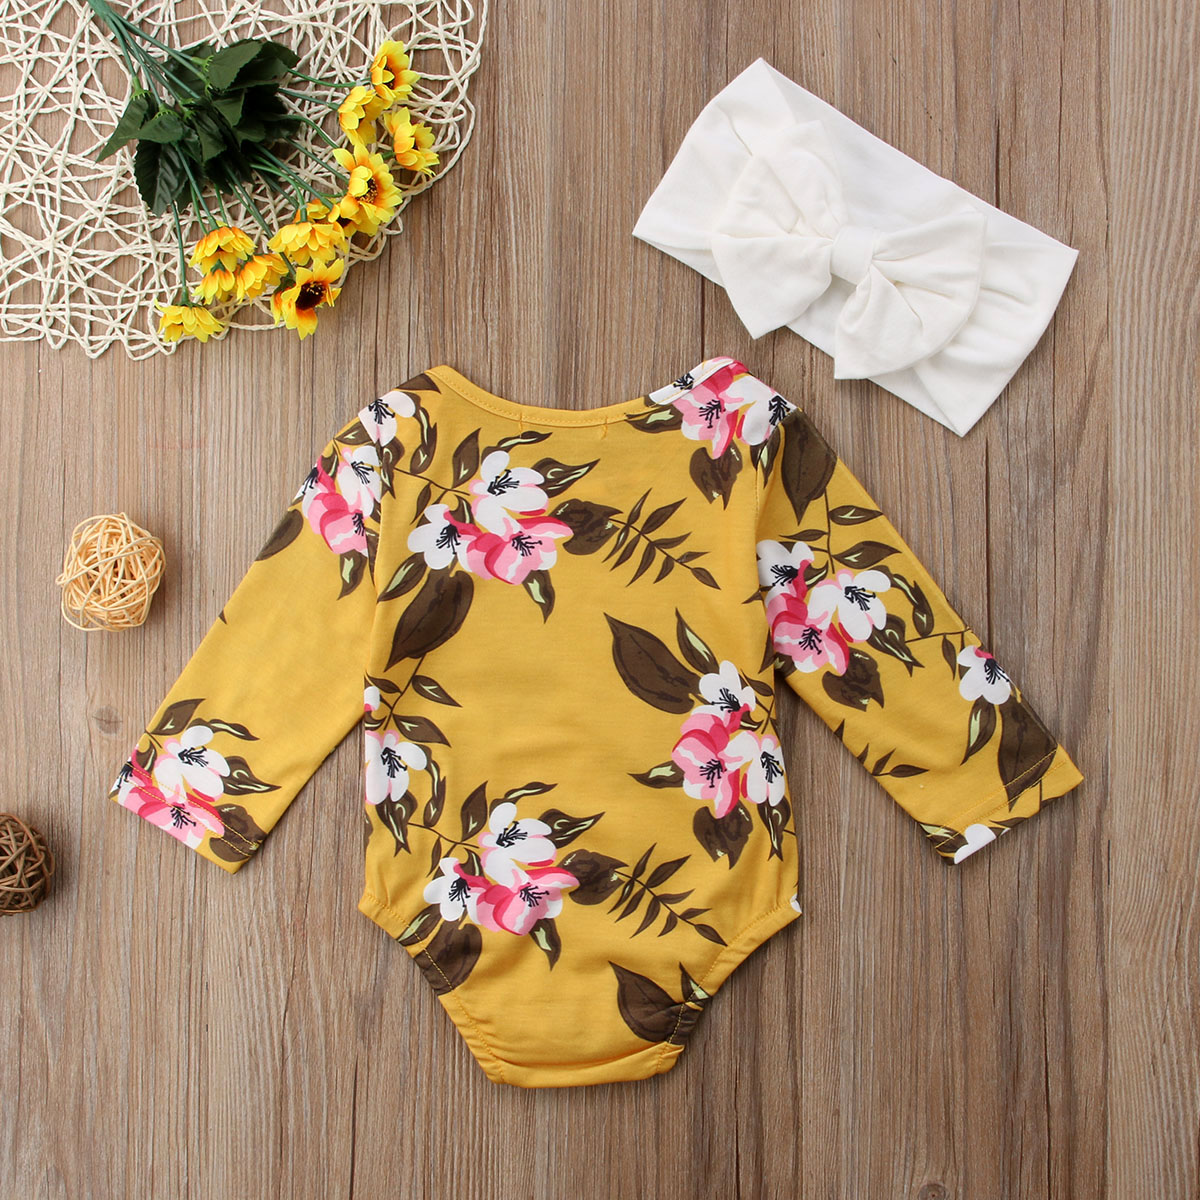 2018 Brand New Newborn Toddler Infant Baby Girl Long Sleeve Floral Romper+Headband 2Pcs Casual Outfits Clothes Jumpsuit Playsuit